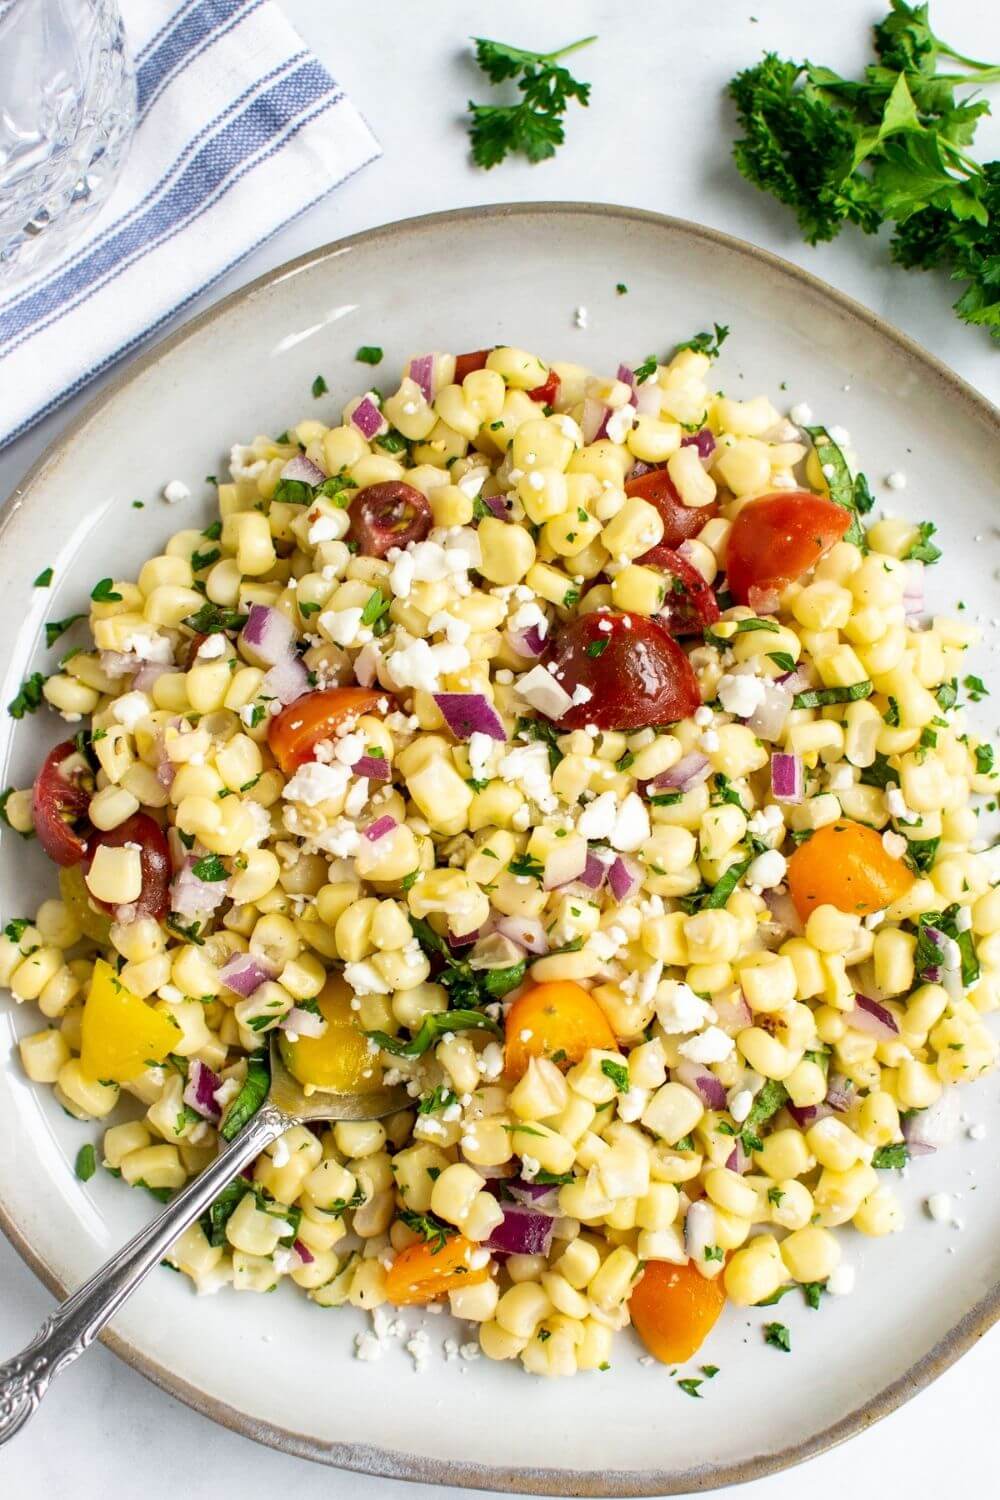 Sweet corn salad on a plate with fork